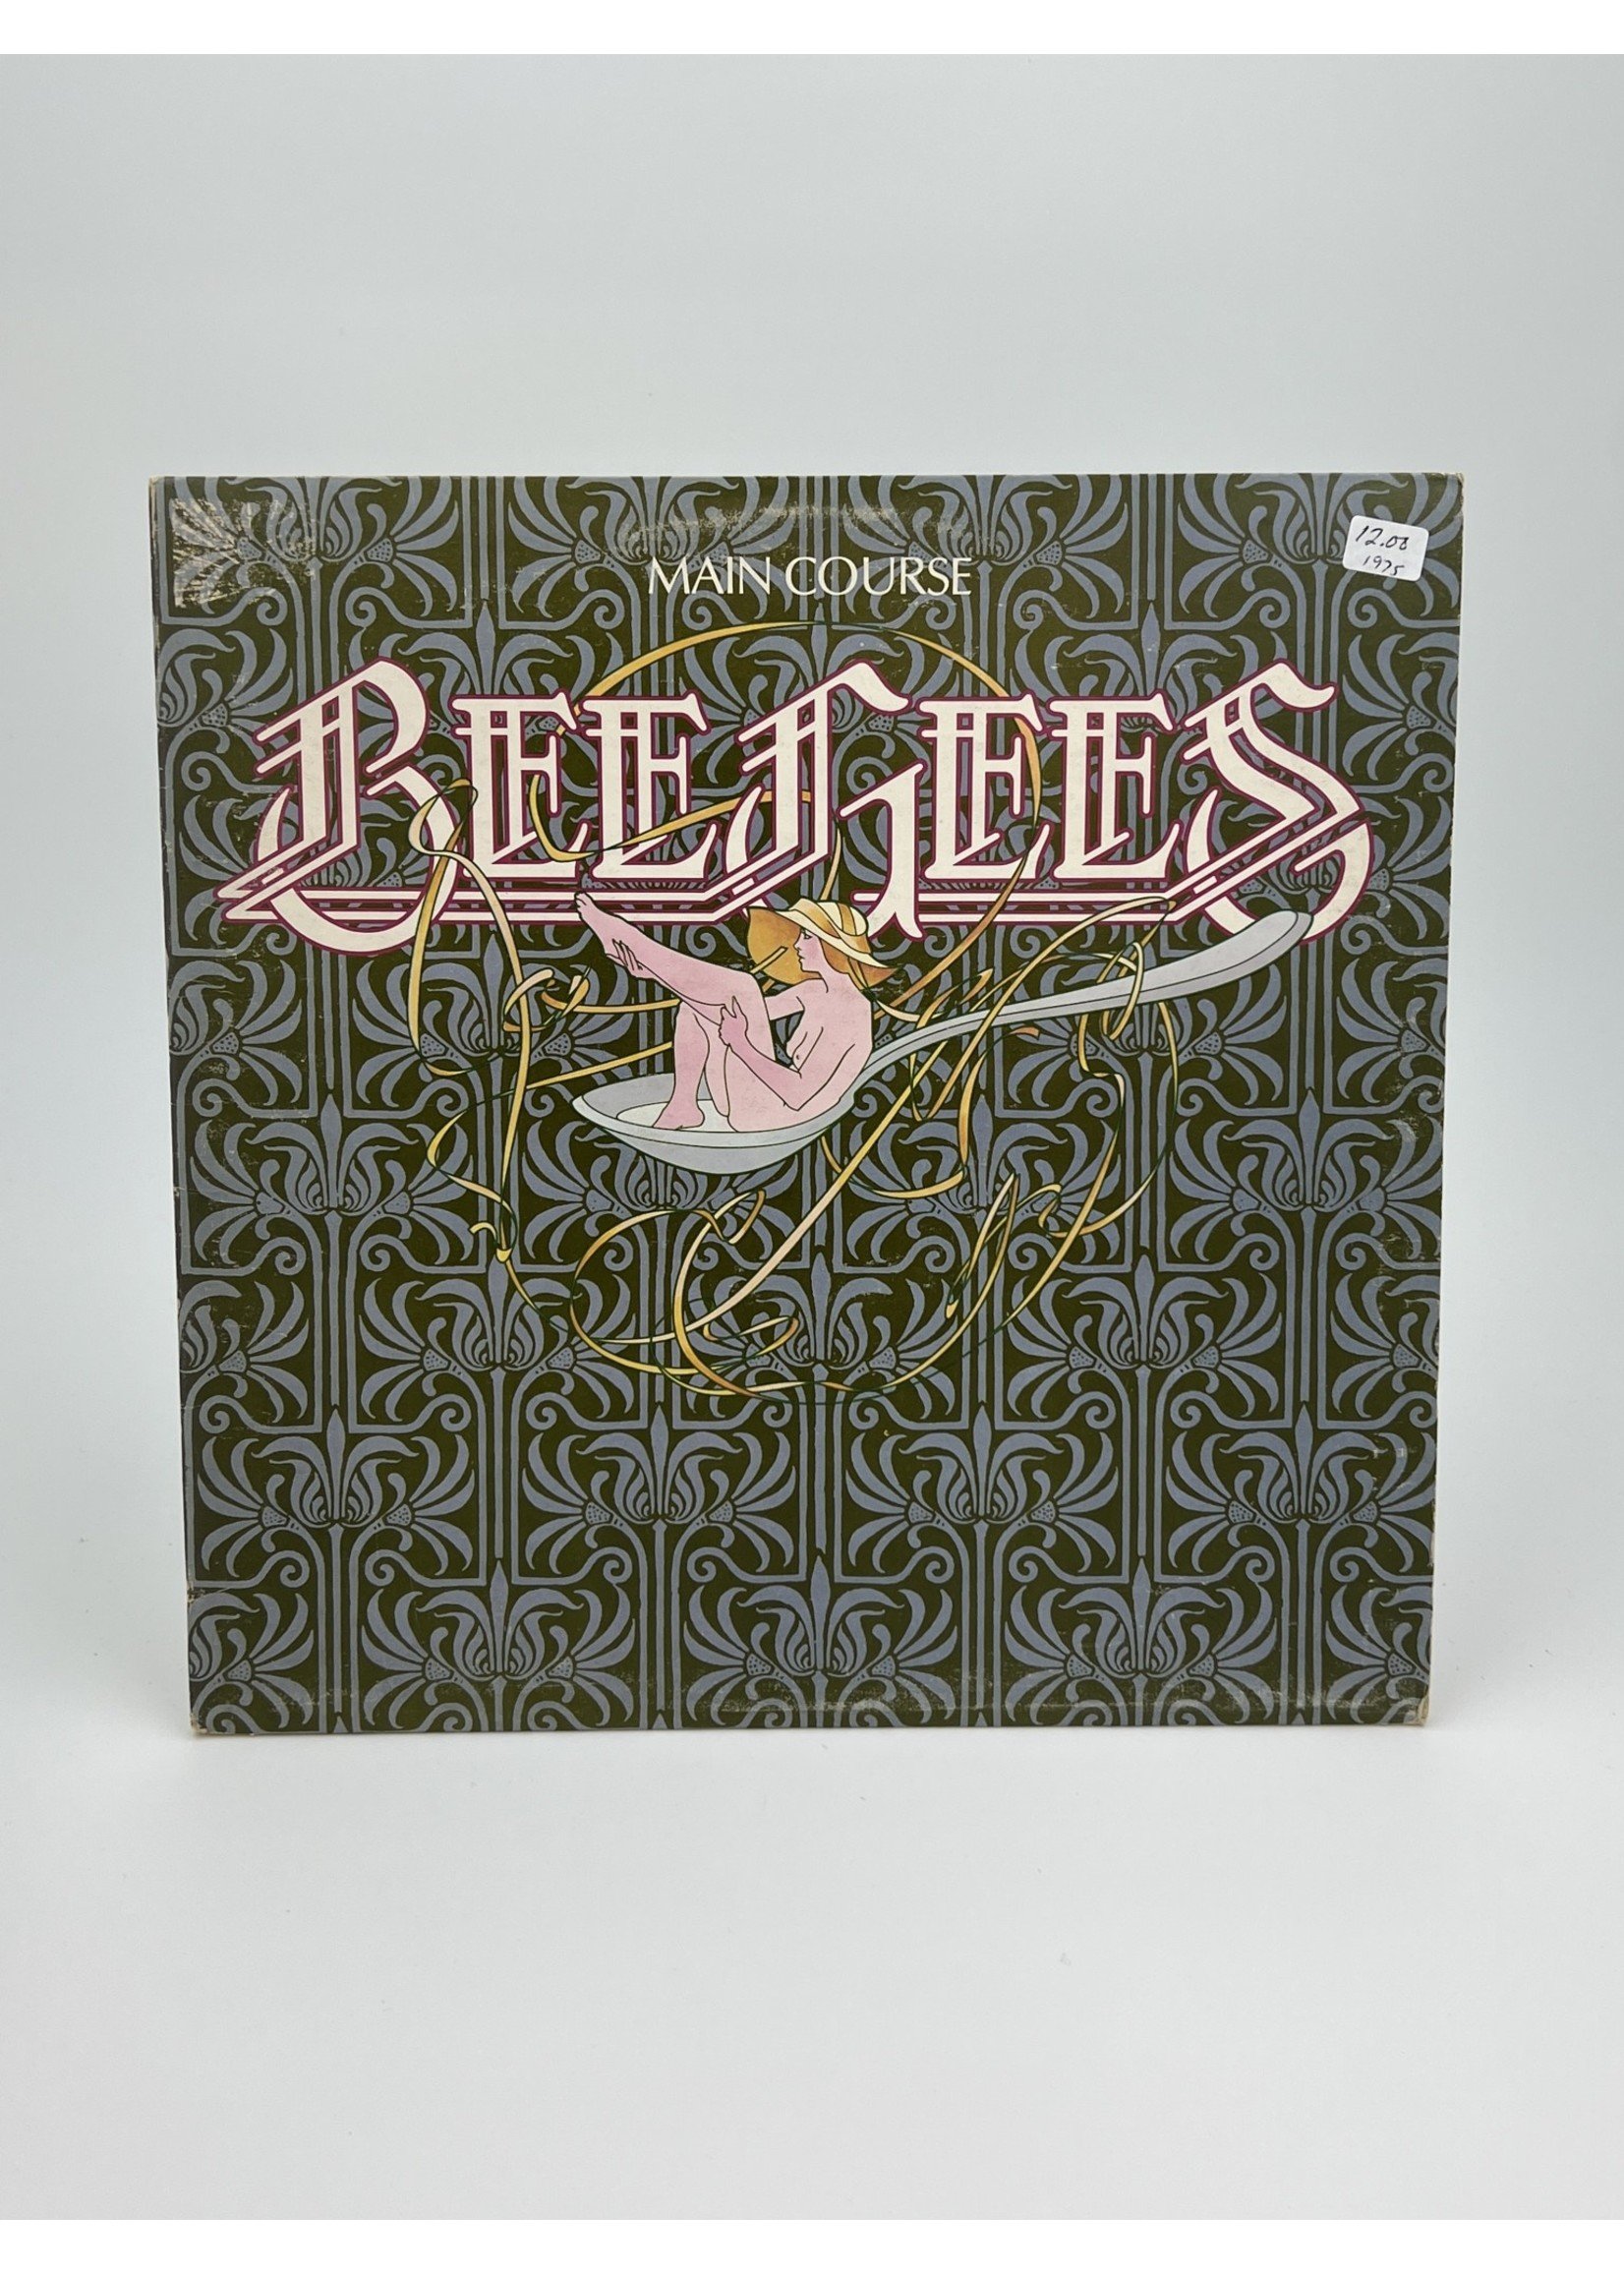 LP Bee Gees Main Course LP Record